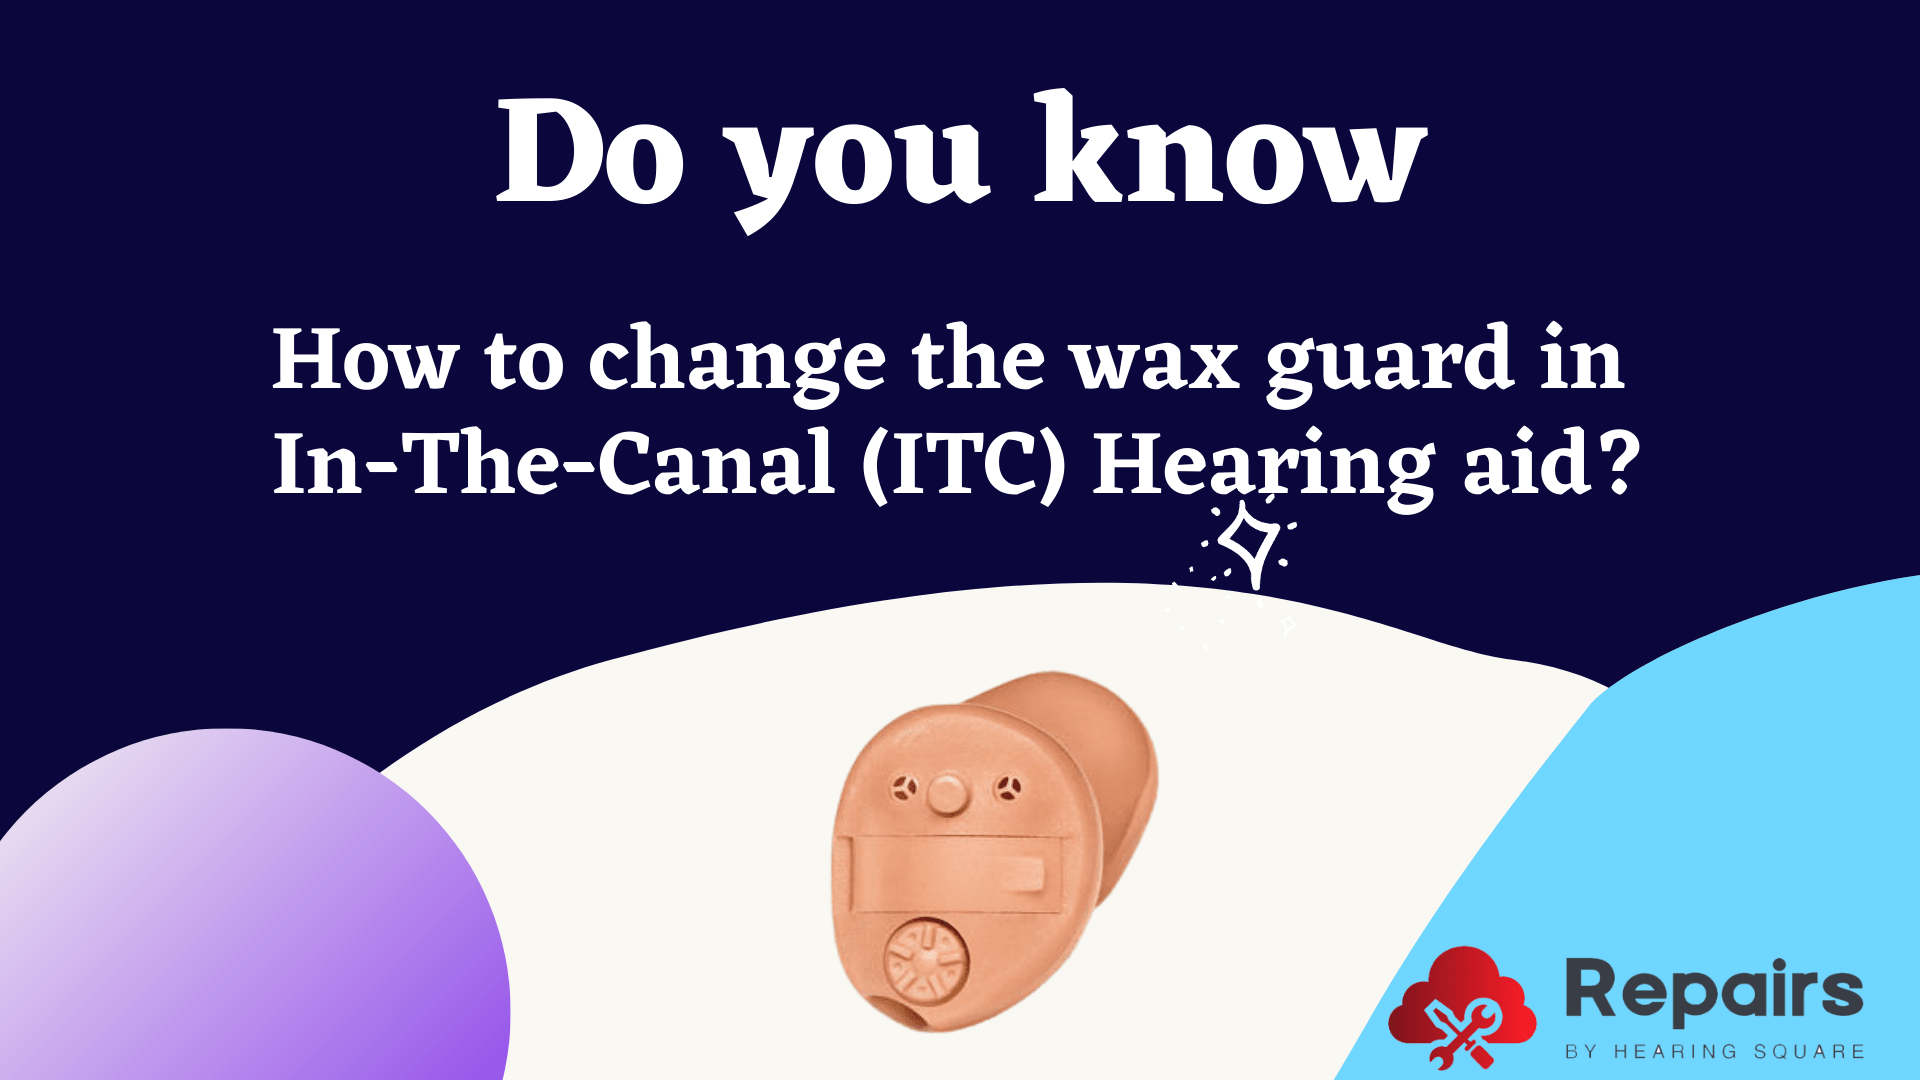 How to change the wax guard in In-The-Canal (ITC) Hearing aid